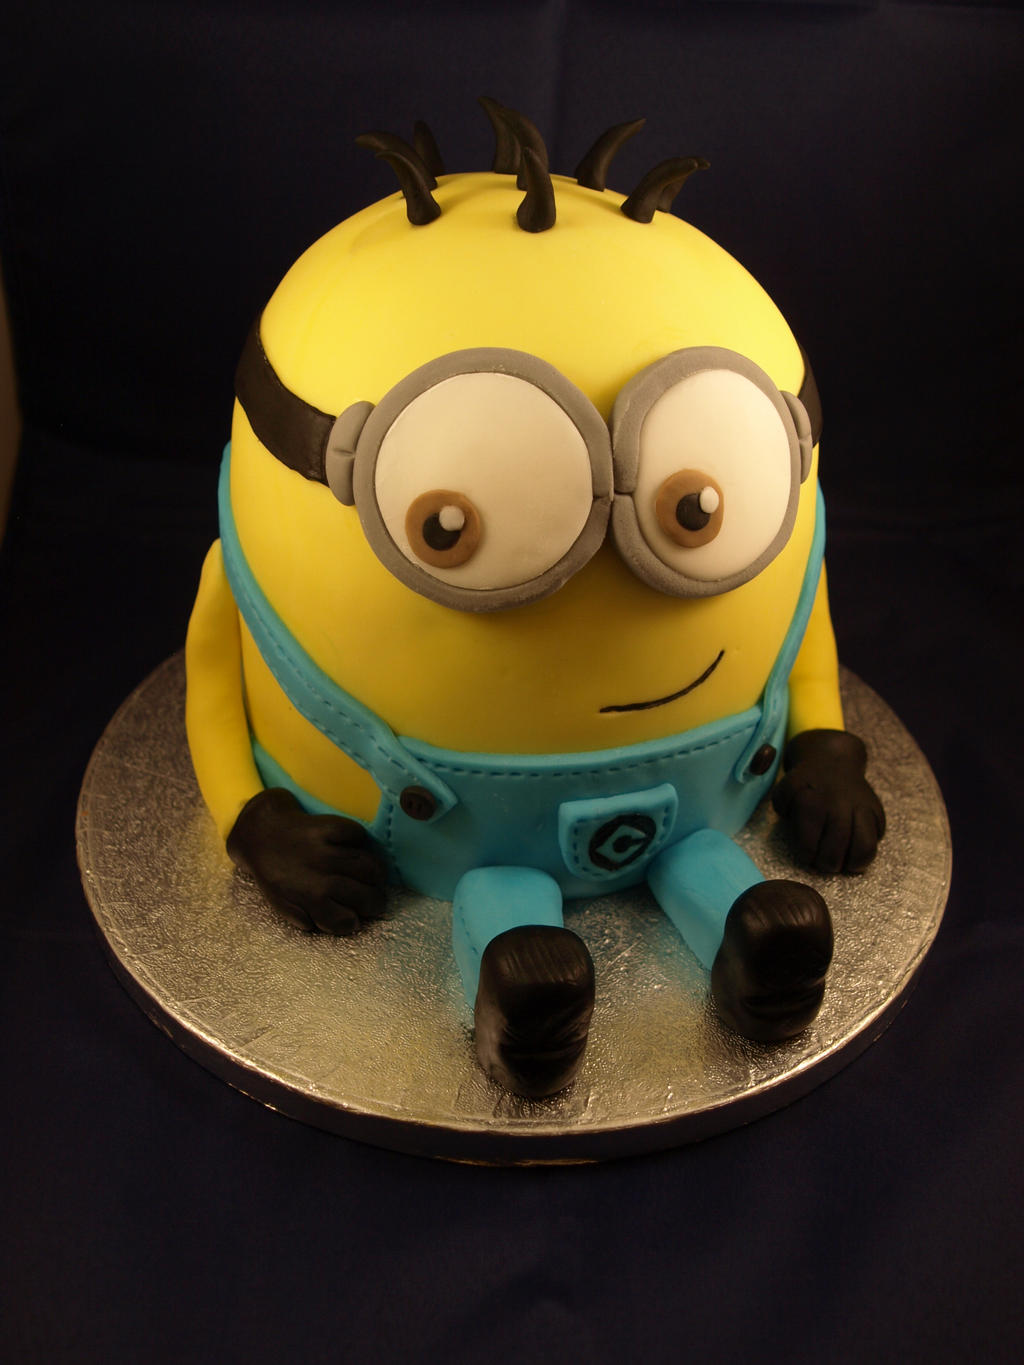 despicable_me__minion_cake_by_sparks1992-d5v1991.jpg